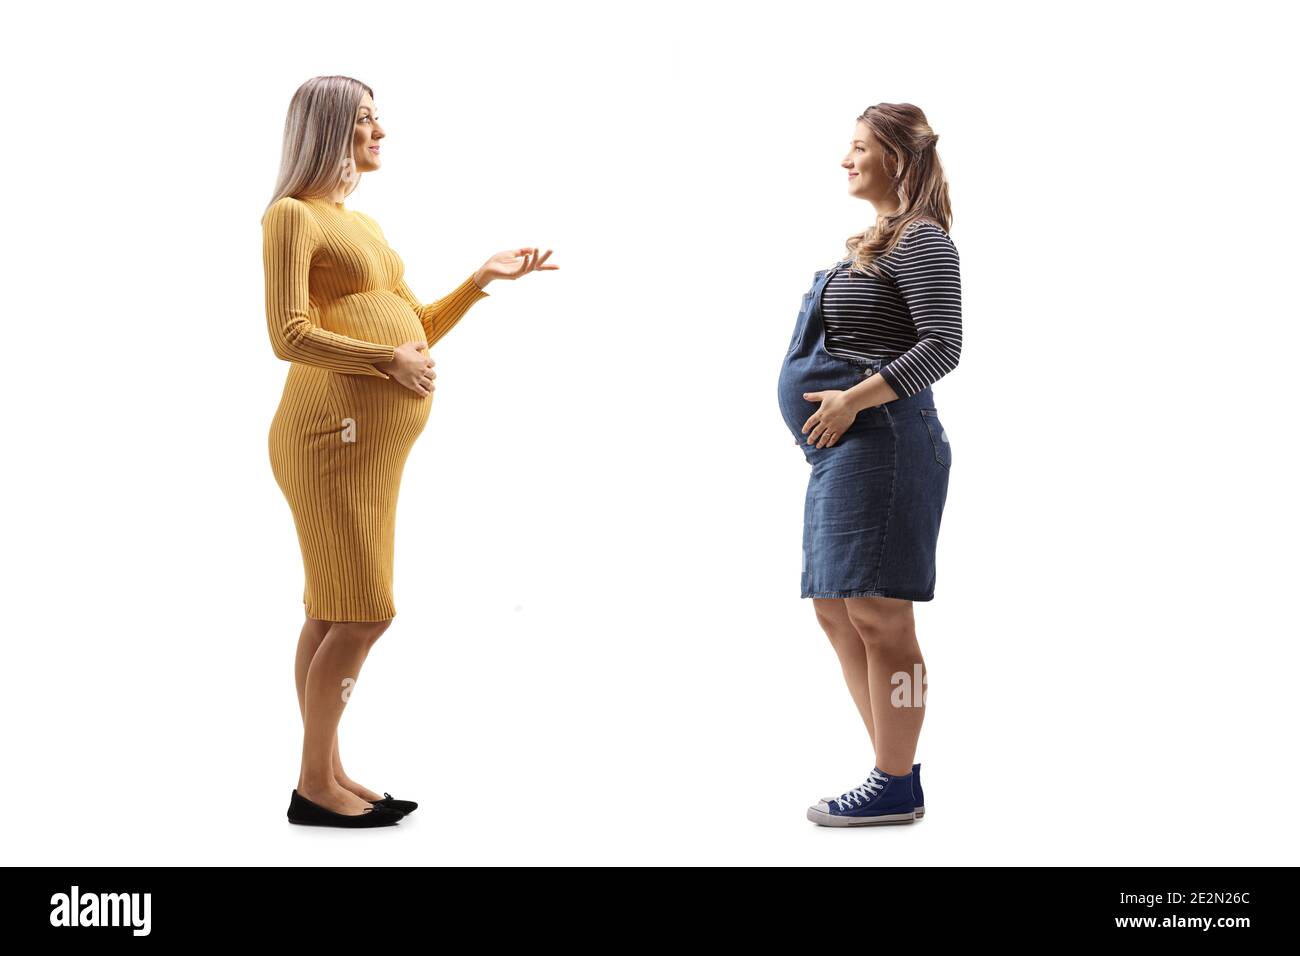 Full length profile shot of two pregnant women talking to eachother isolated on white background Stock Photo